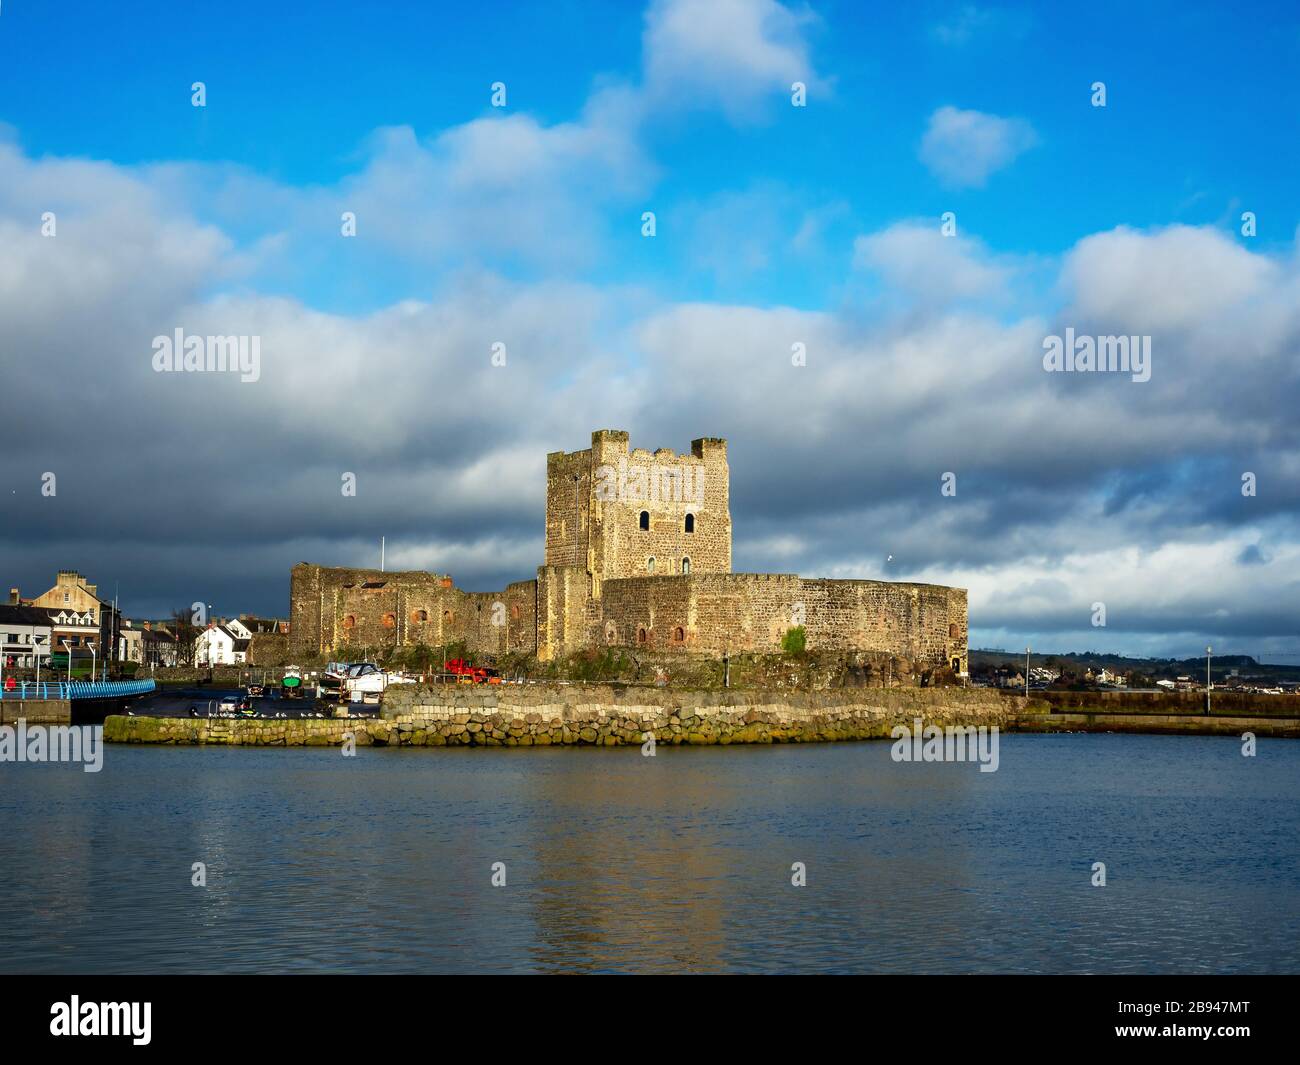 Medieval Norman Castle in Carrickfergus near Belfast, Northern Ireland, with marina in winter. Dramatic sky with dark stormy clouds. Sunset light Stock Photo